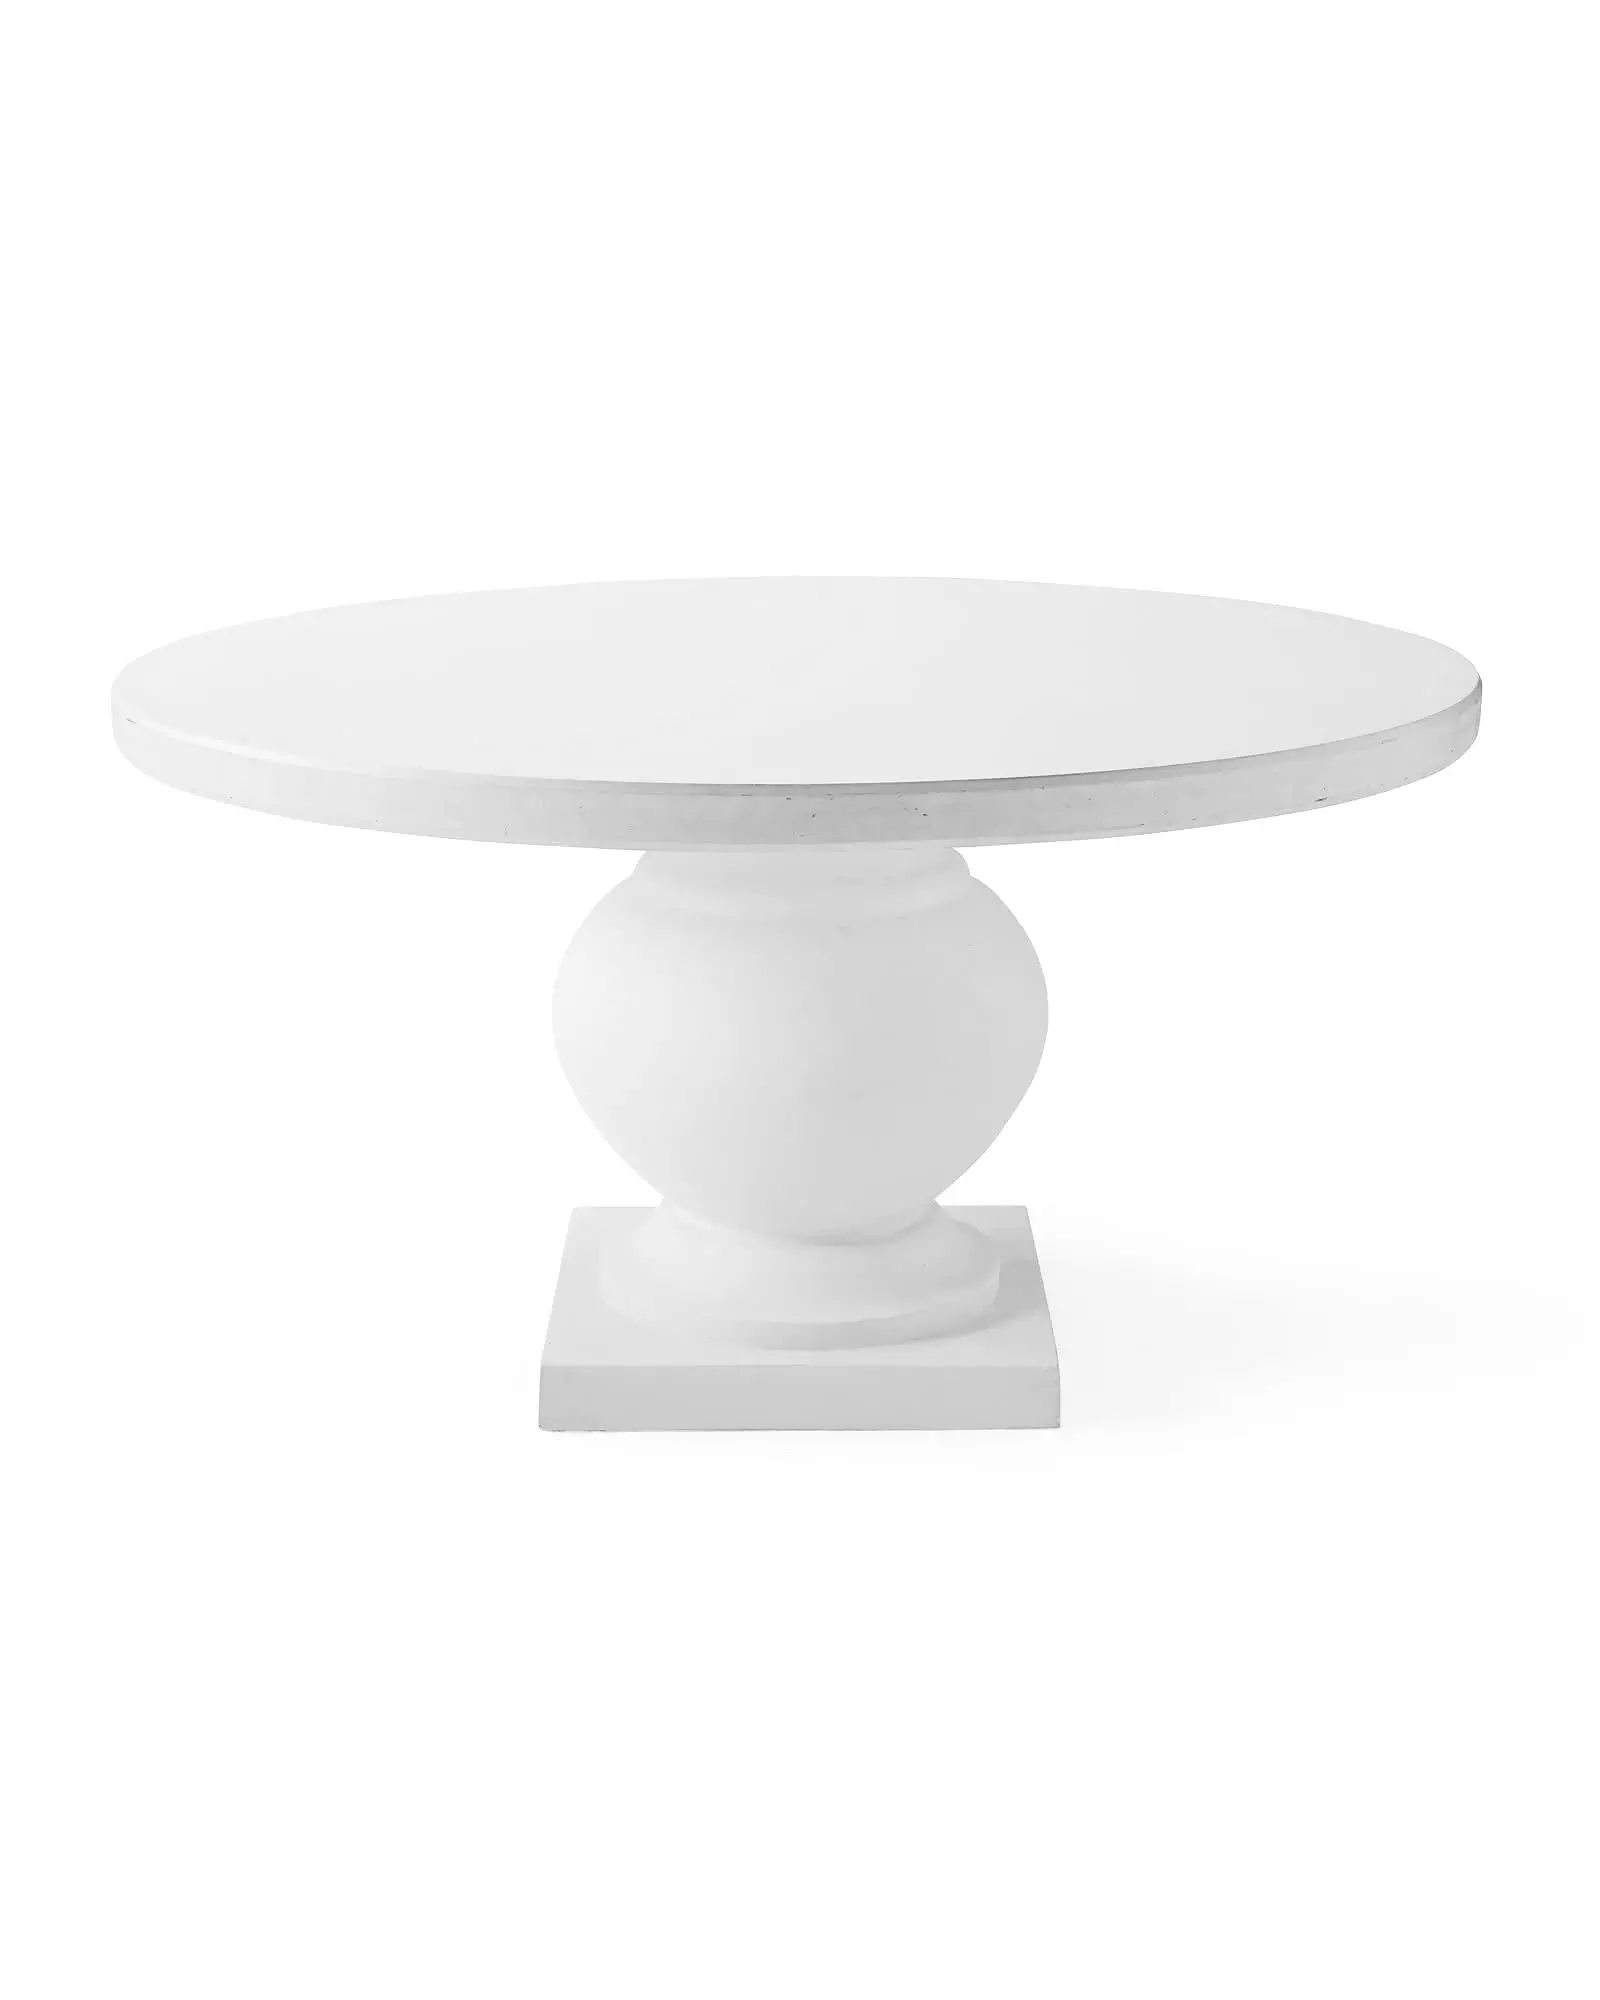 serena and lily terrace round dining table white classical stone pedestal base